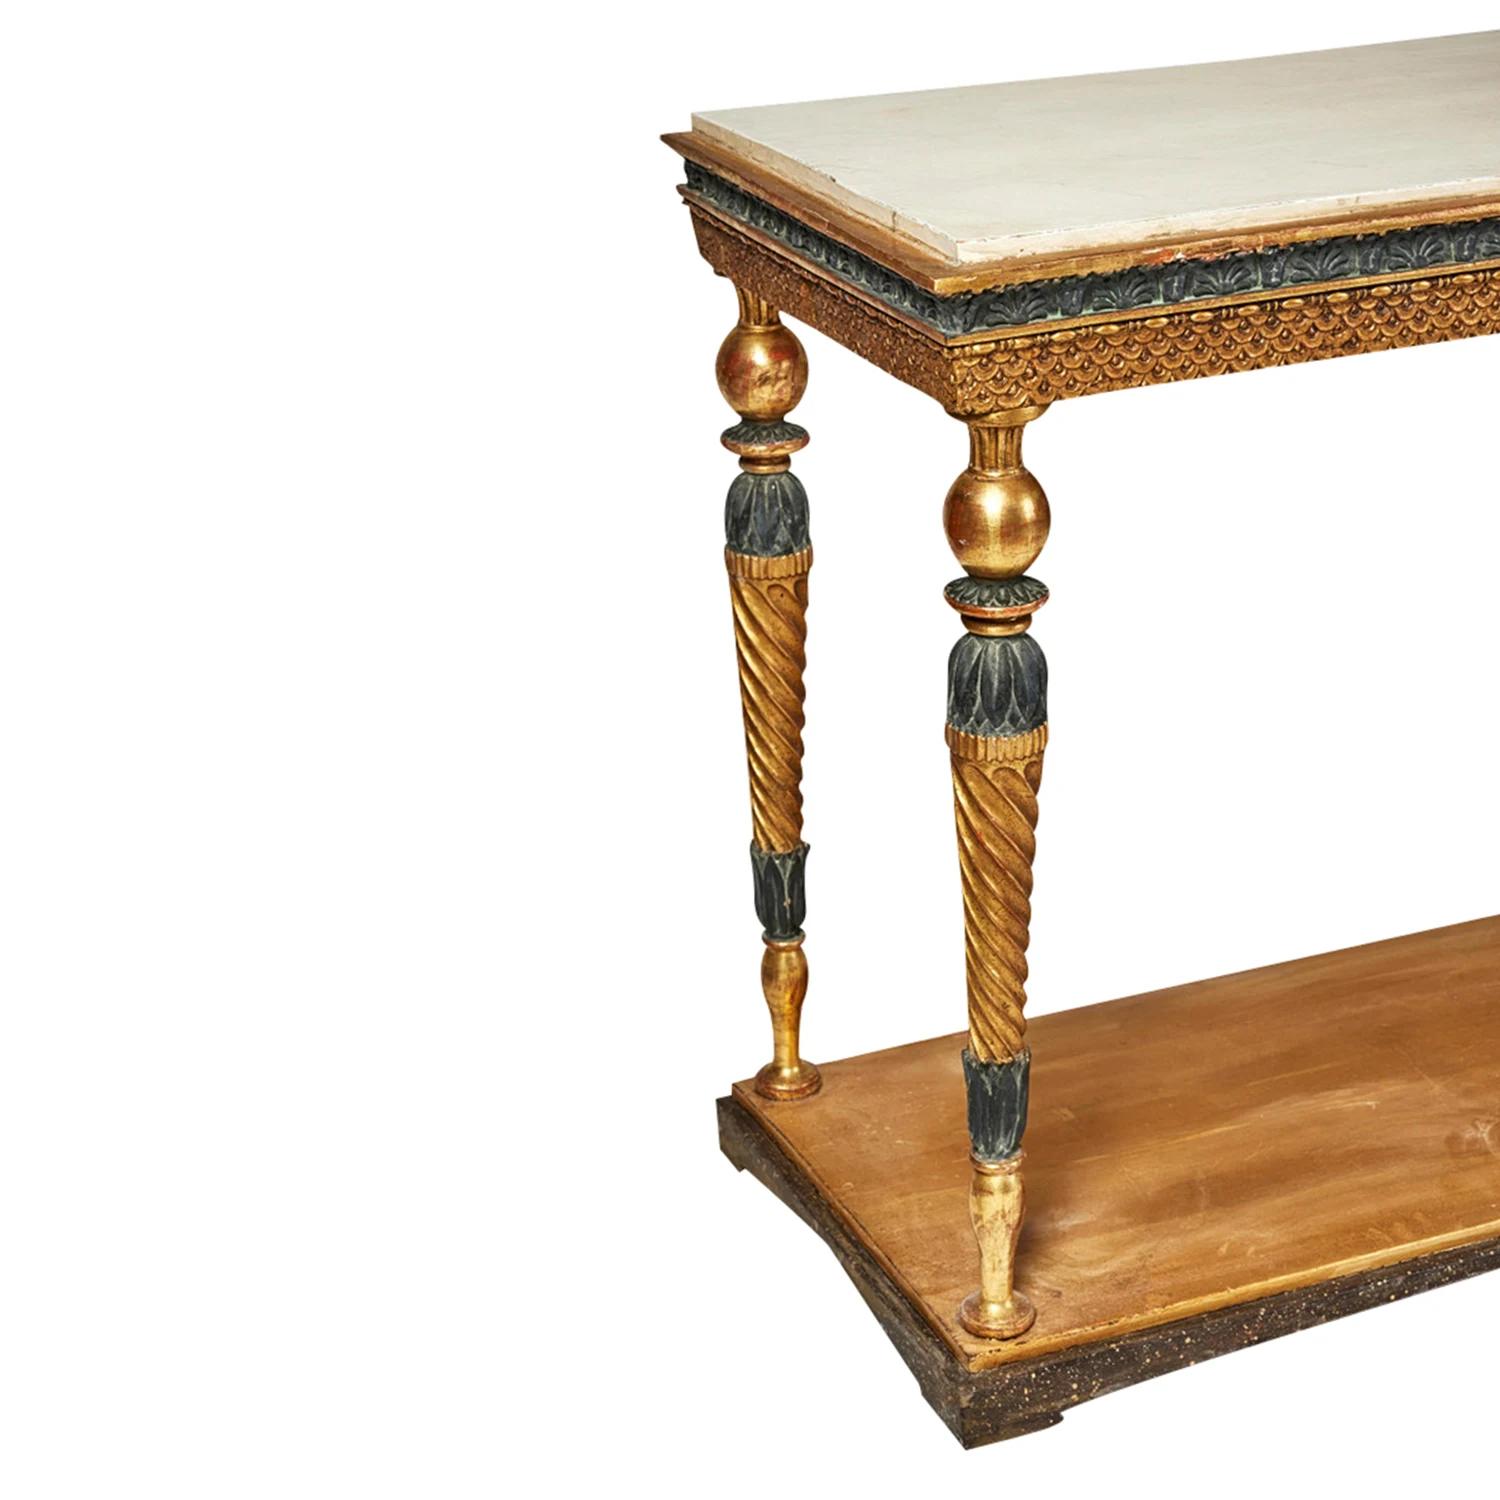 19th Century Swedish Gustavian Gilded Pinewood Console Table by Jonas Frisk In Good Condition For Sale In West Palm Beach, FL